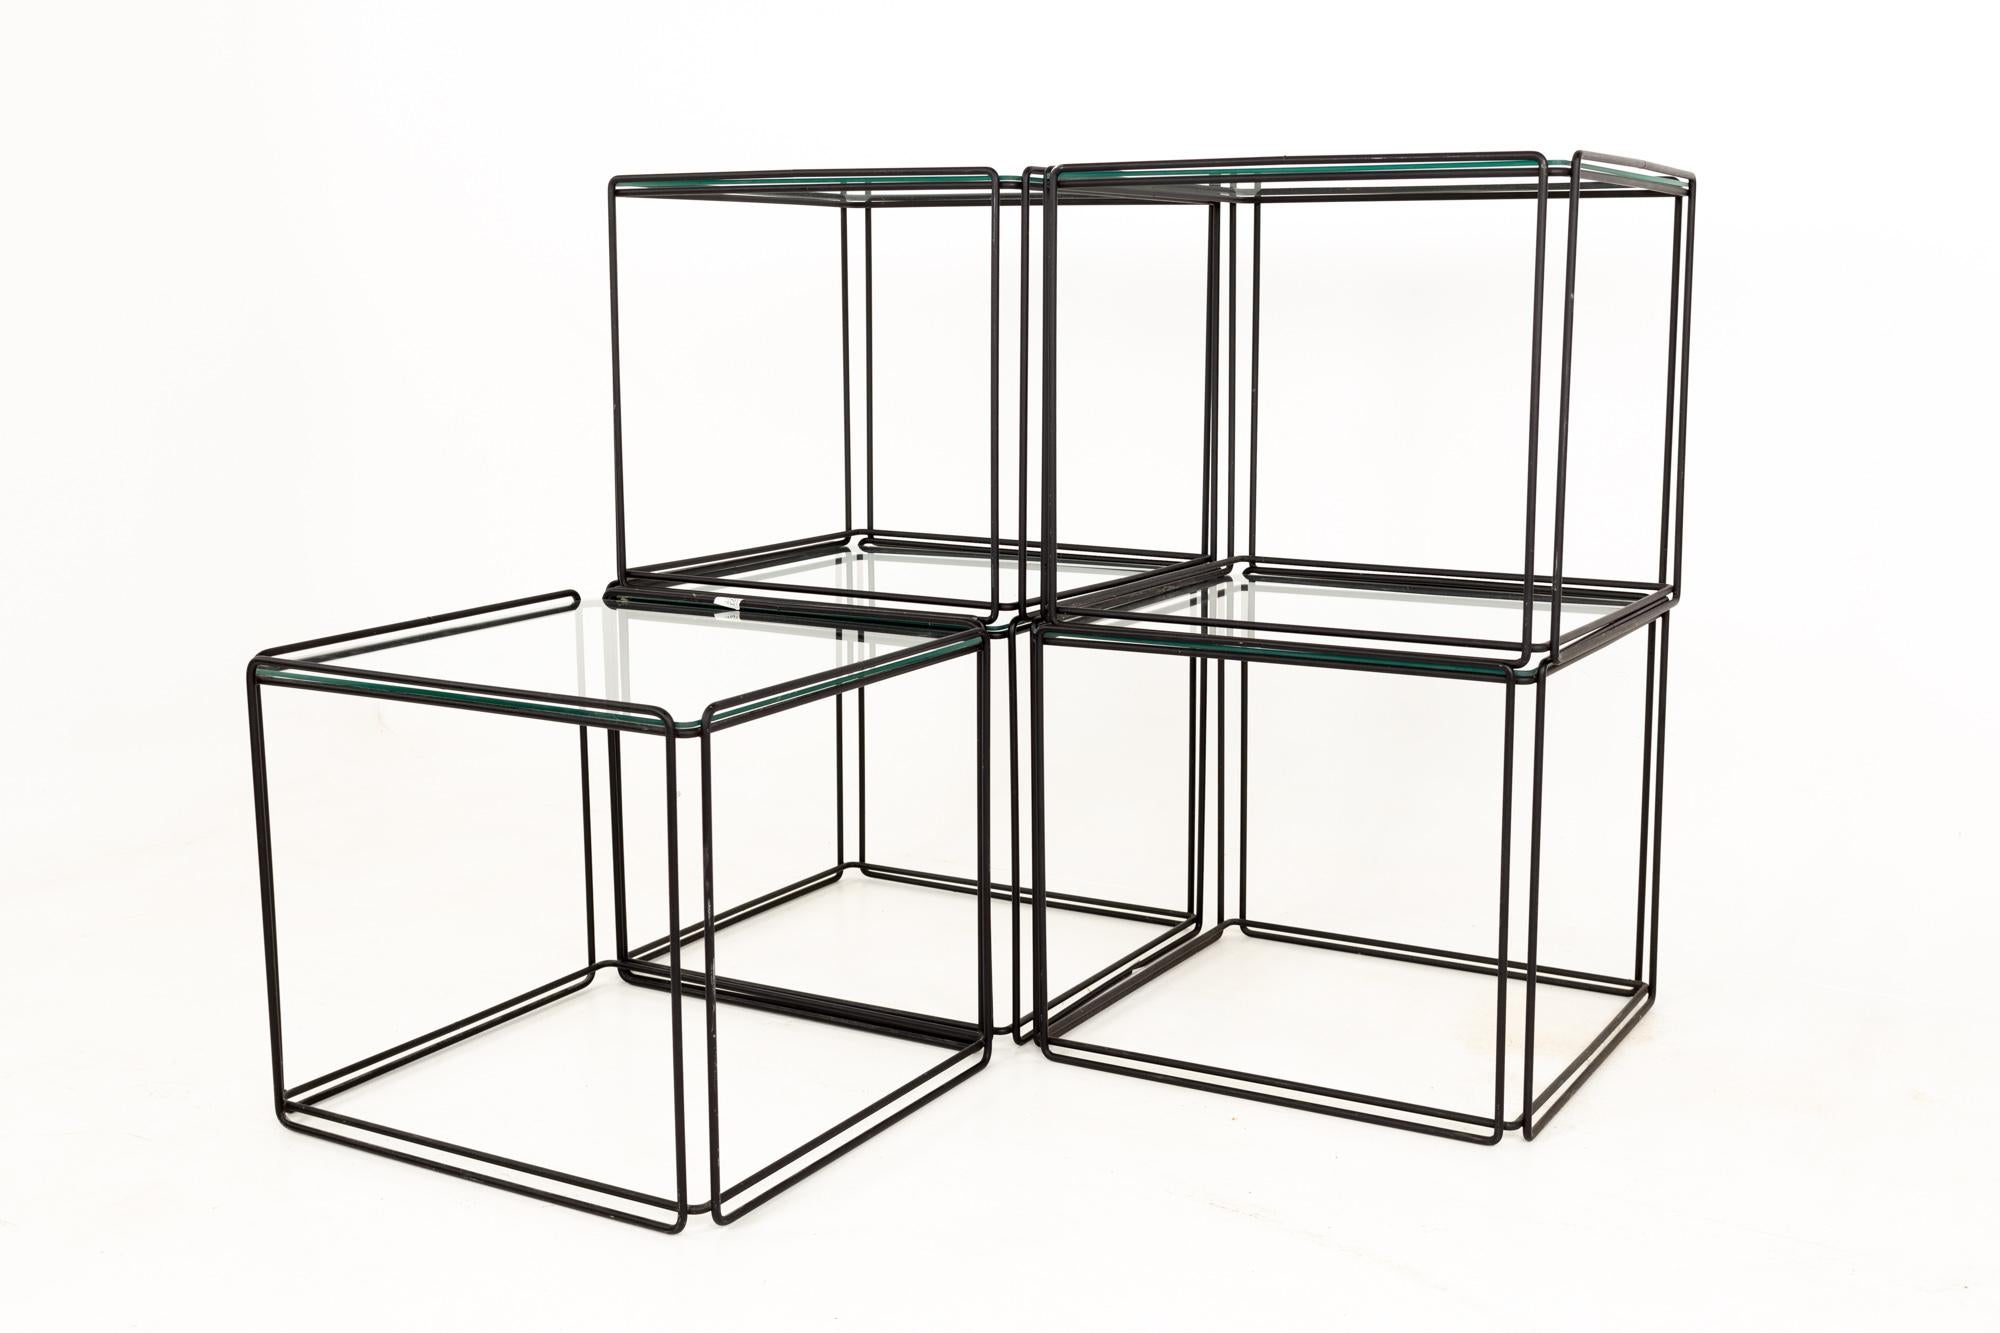 Max Sauze isosceles mid century iron and glass stacking side end tables - set of 5
These tables measure 20.25 wide x 20.25 deep x 17.25 inches high

All pieces of furniture can be had in what we call restored vintage condition. That means the